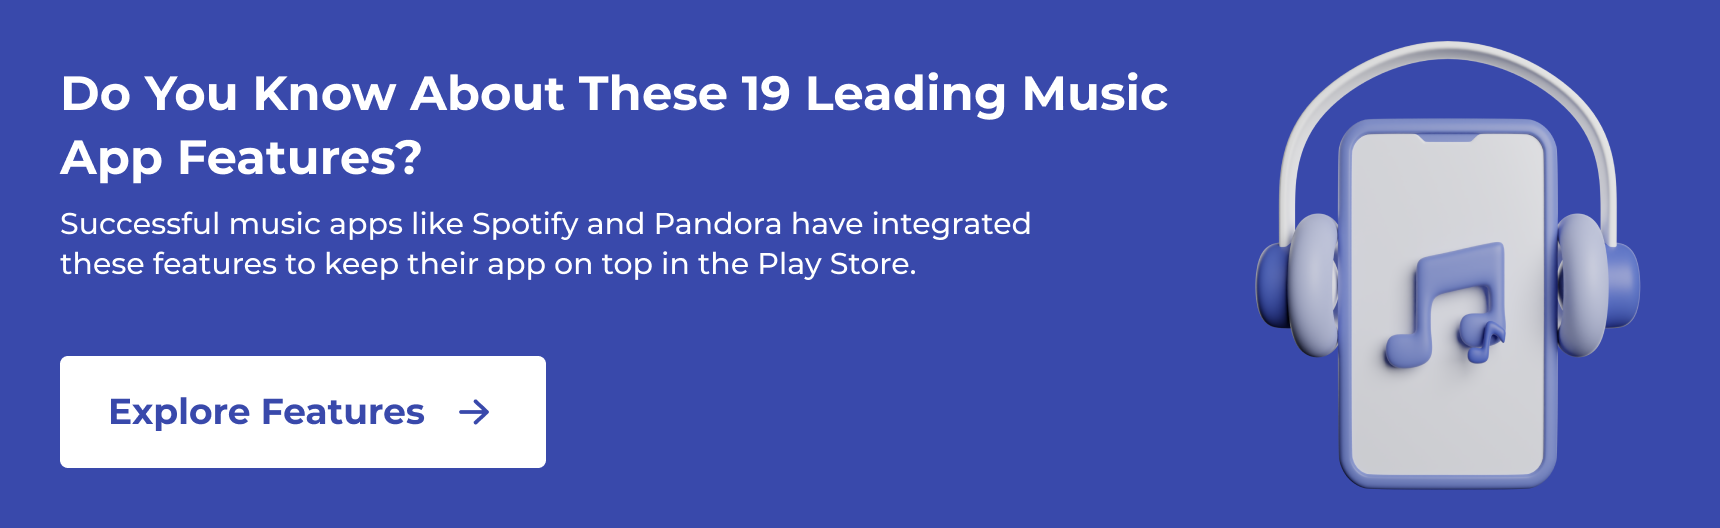 Do You Know About These 19 Leading Music App Features